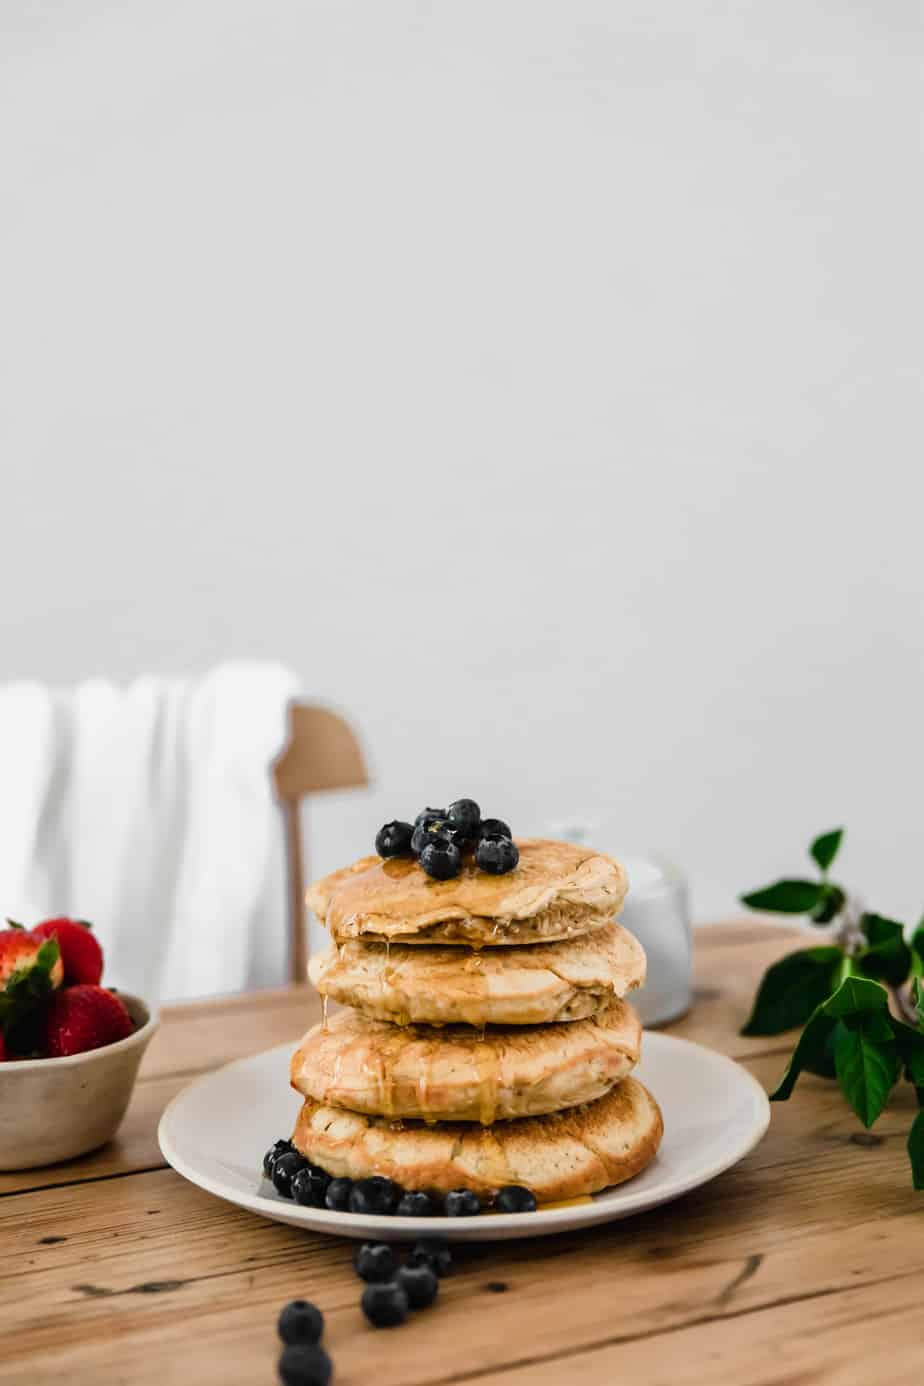 A stack of dairy-free pancakes with berries and honey on a wooden table.